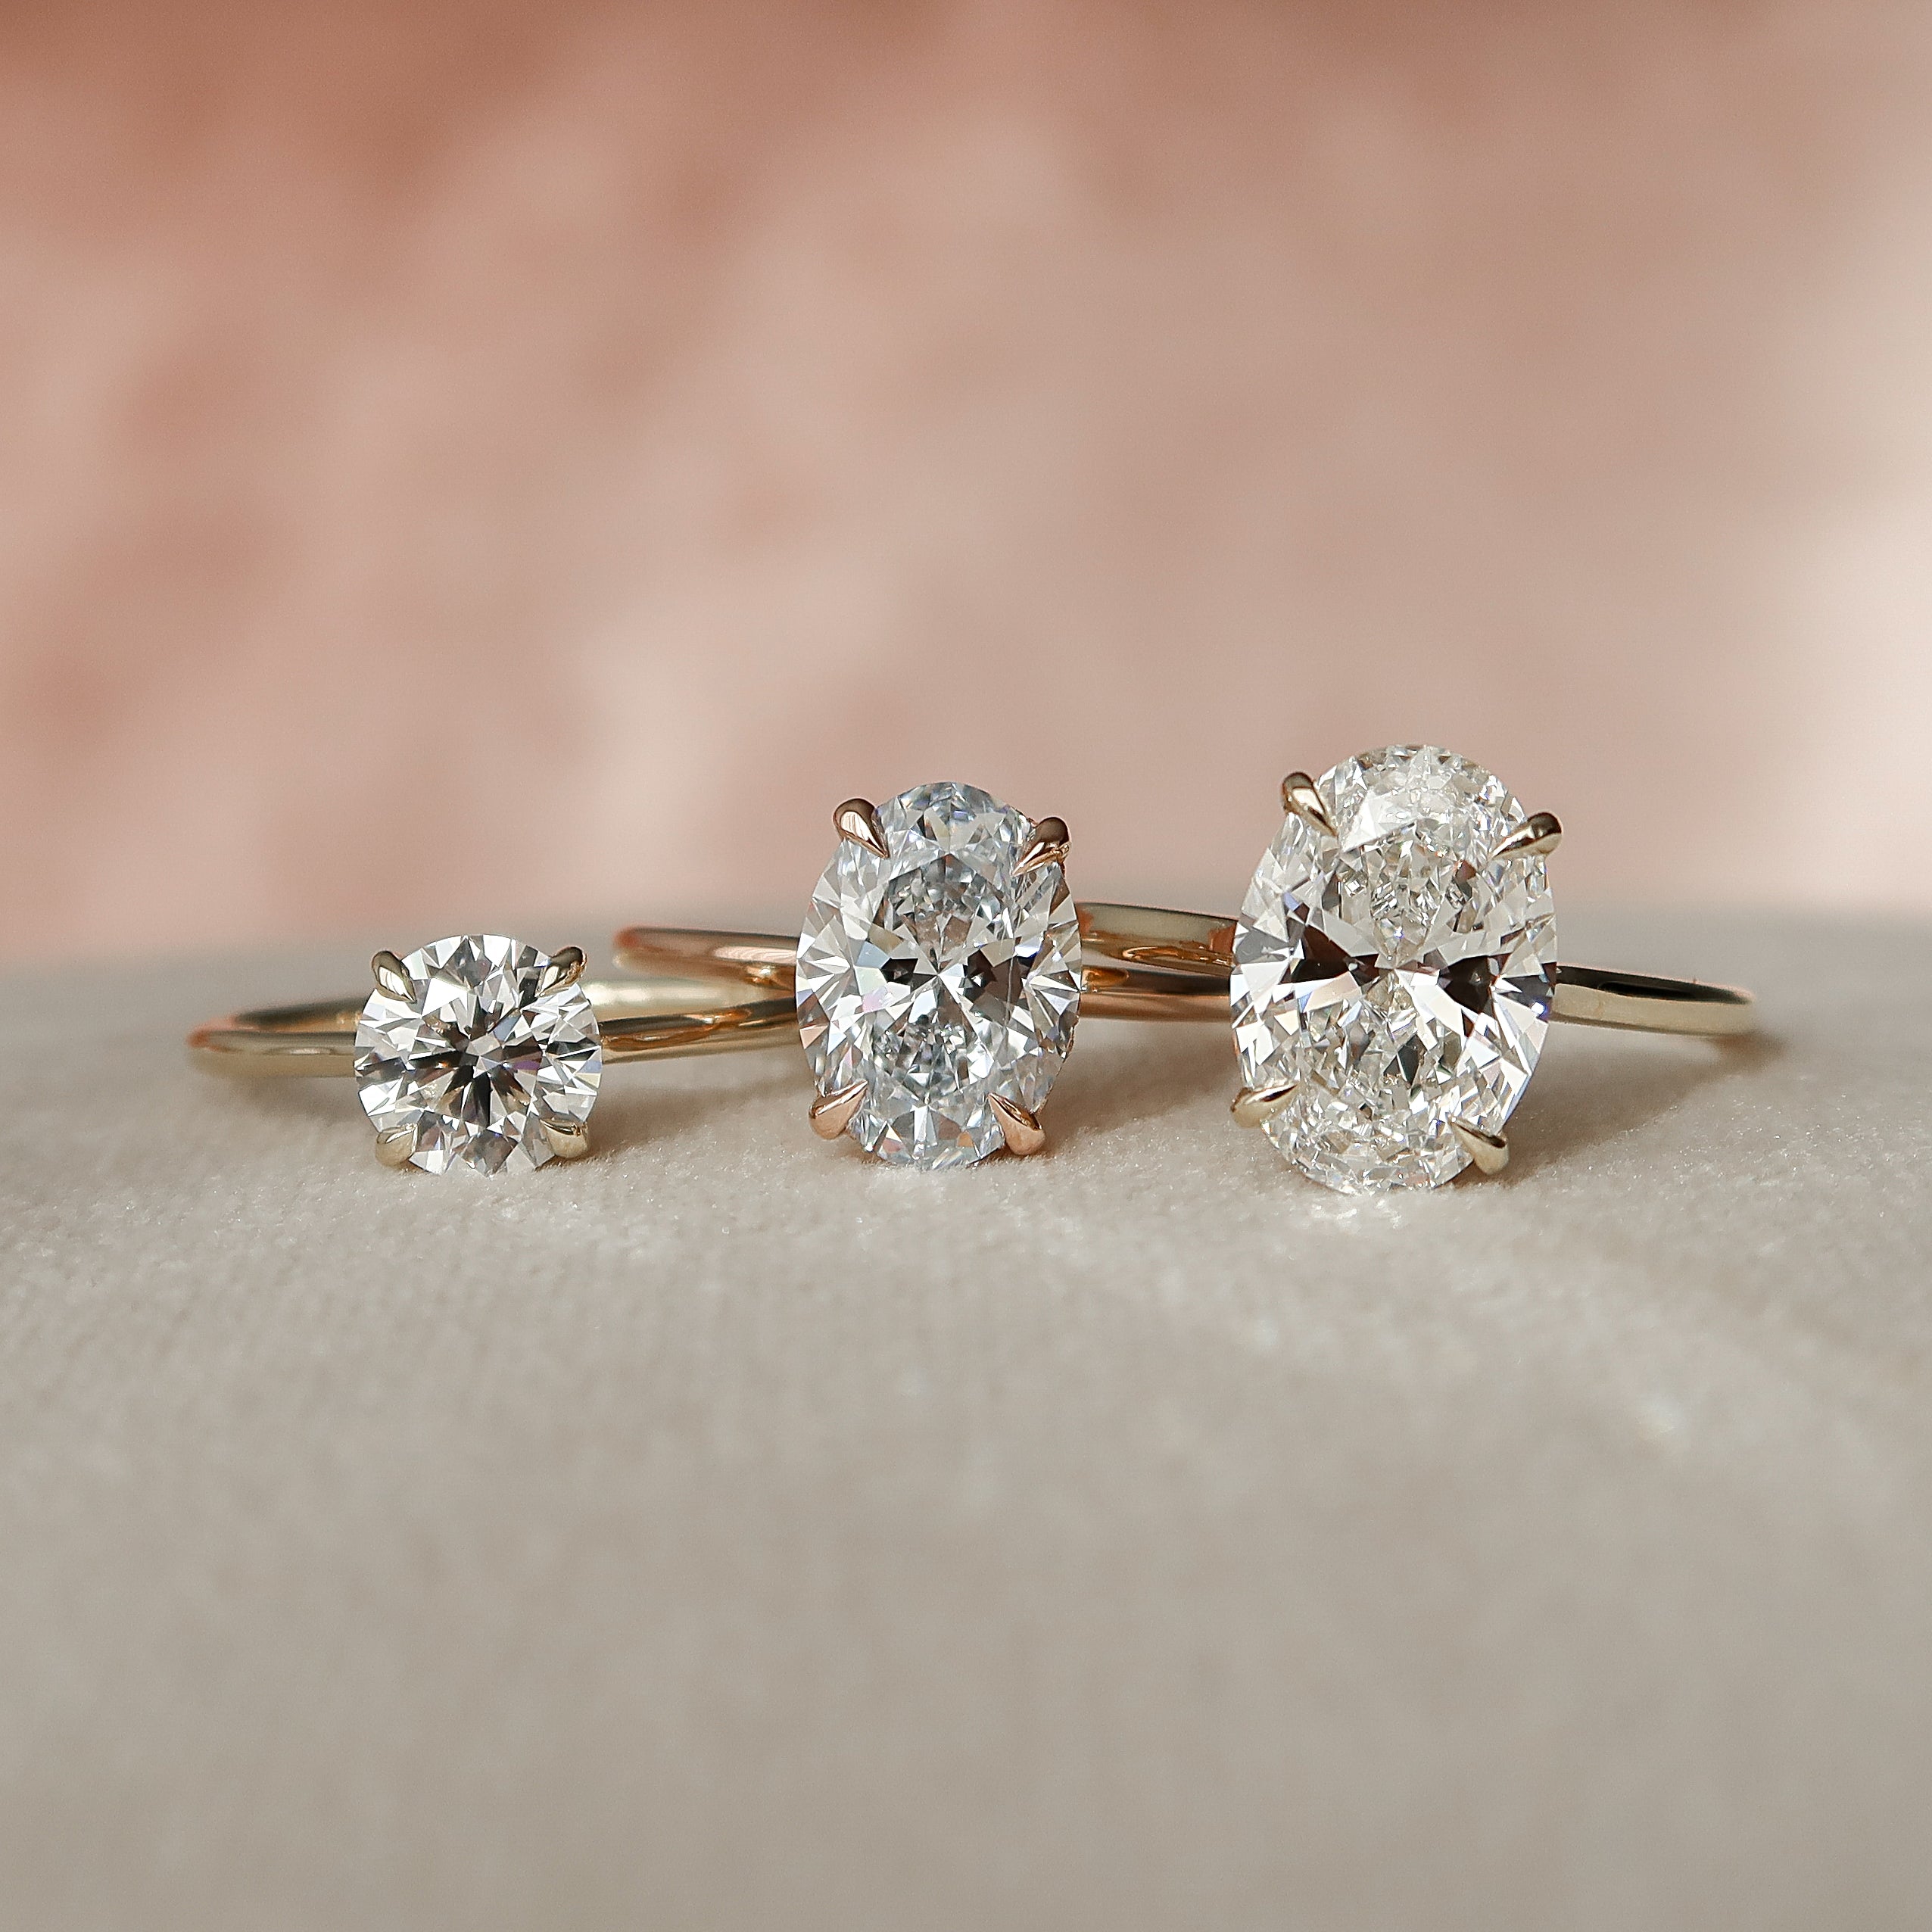 What Is The Perfect Size Engagement Ring?